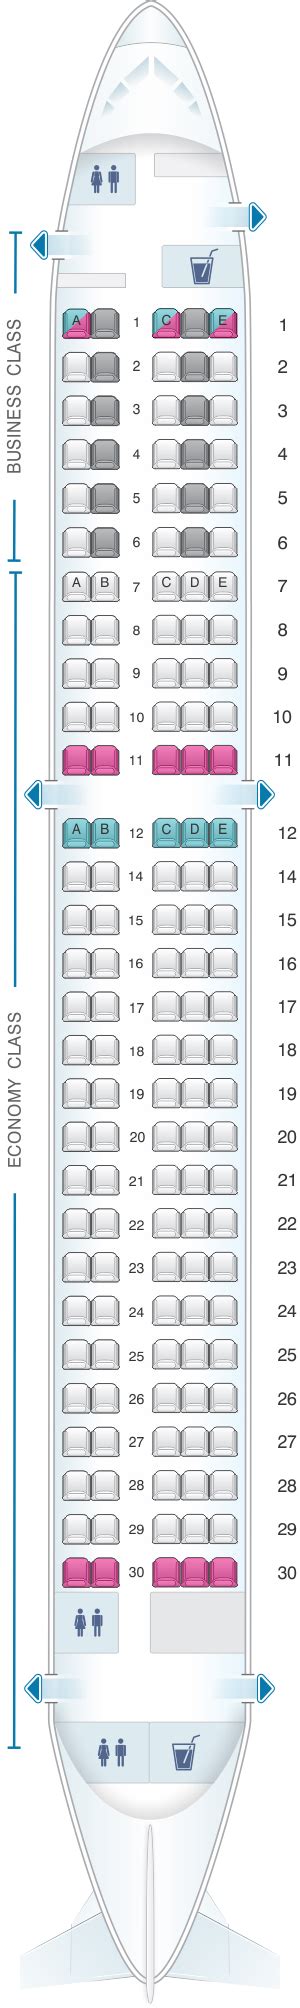 Airbus A220 300 Seating